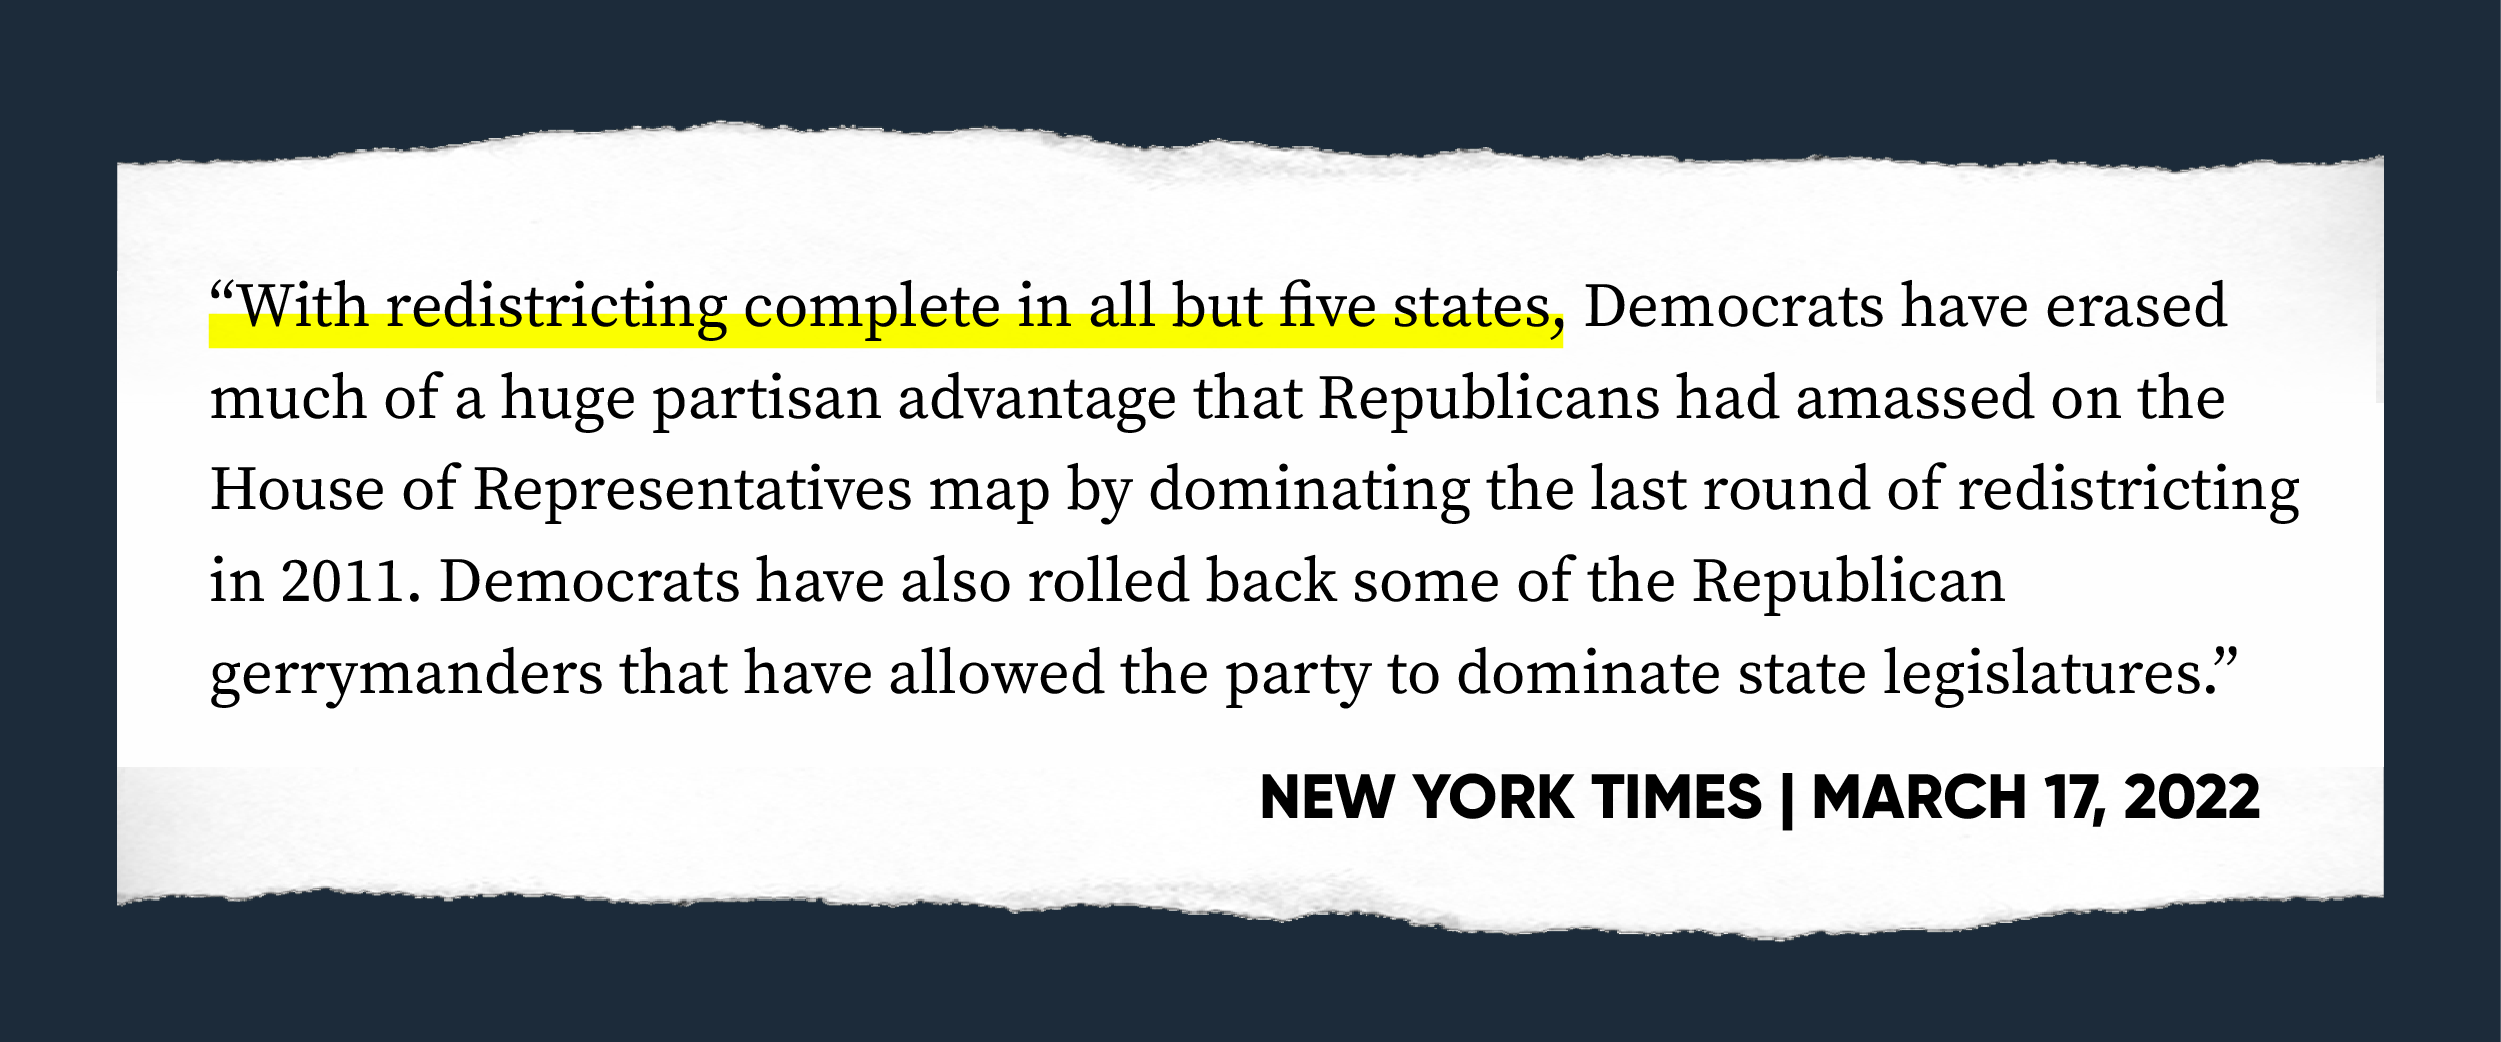 “With redistricting complete in all but five states, Democrats have erased much of a huge partisan advantage that Republicans had amassed on the House of Representatives map by dominating the last round of redistricting in 2011. Democrats have also rolled back some of the Republican gerrymanders that have allowed the party to dominate state legislatures.” -- New York Times, March 17, 2022